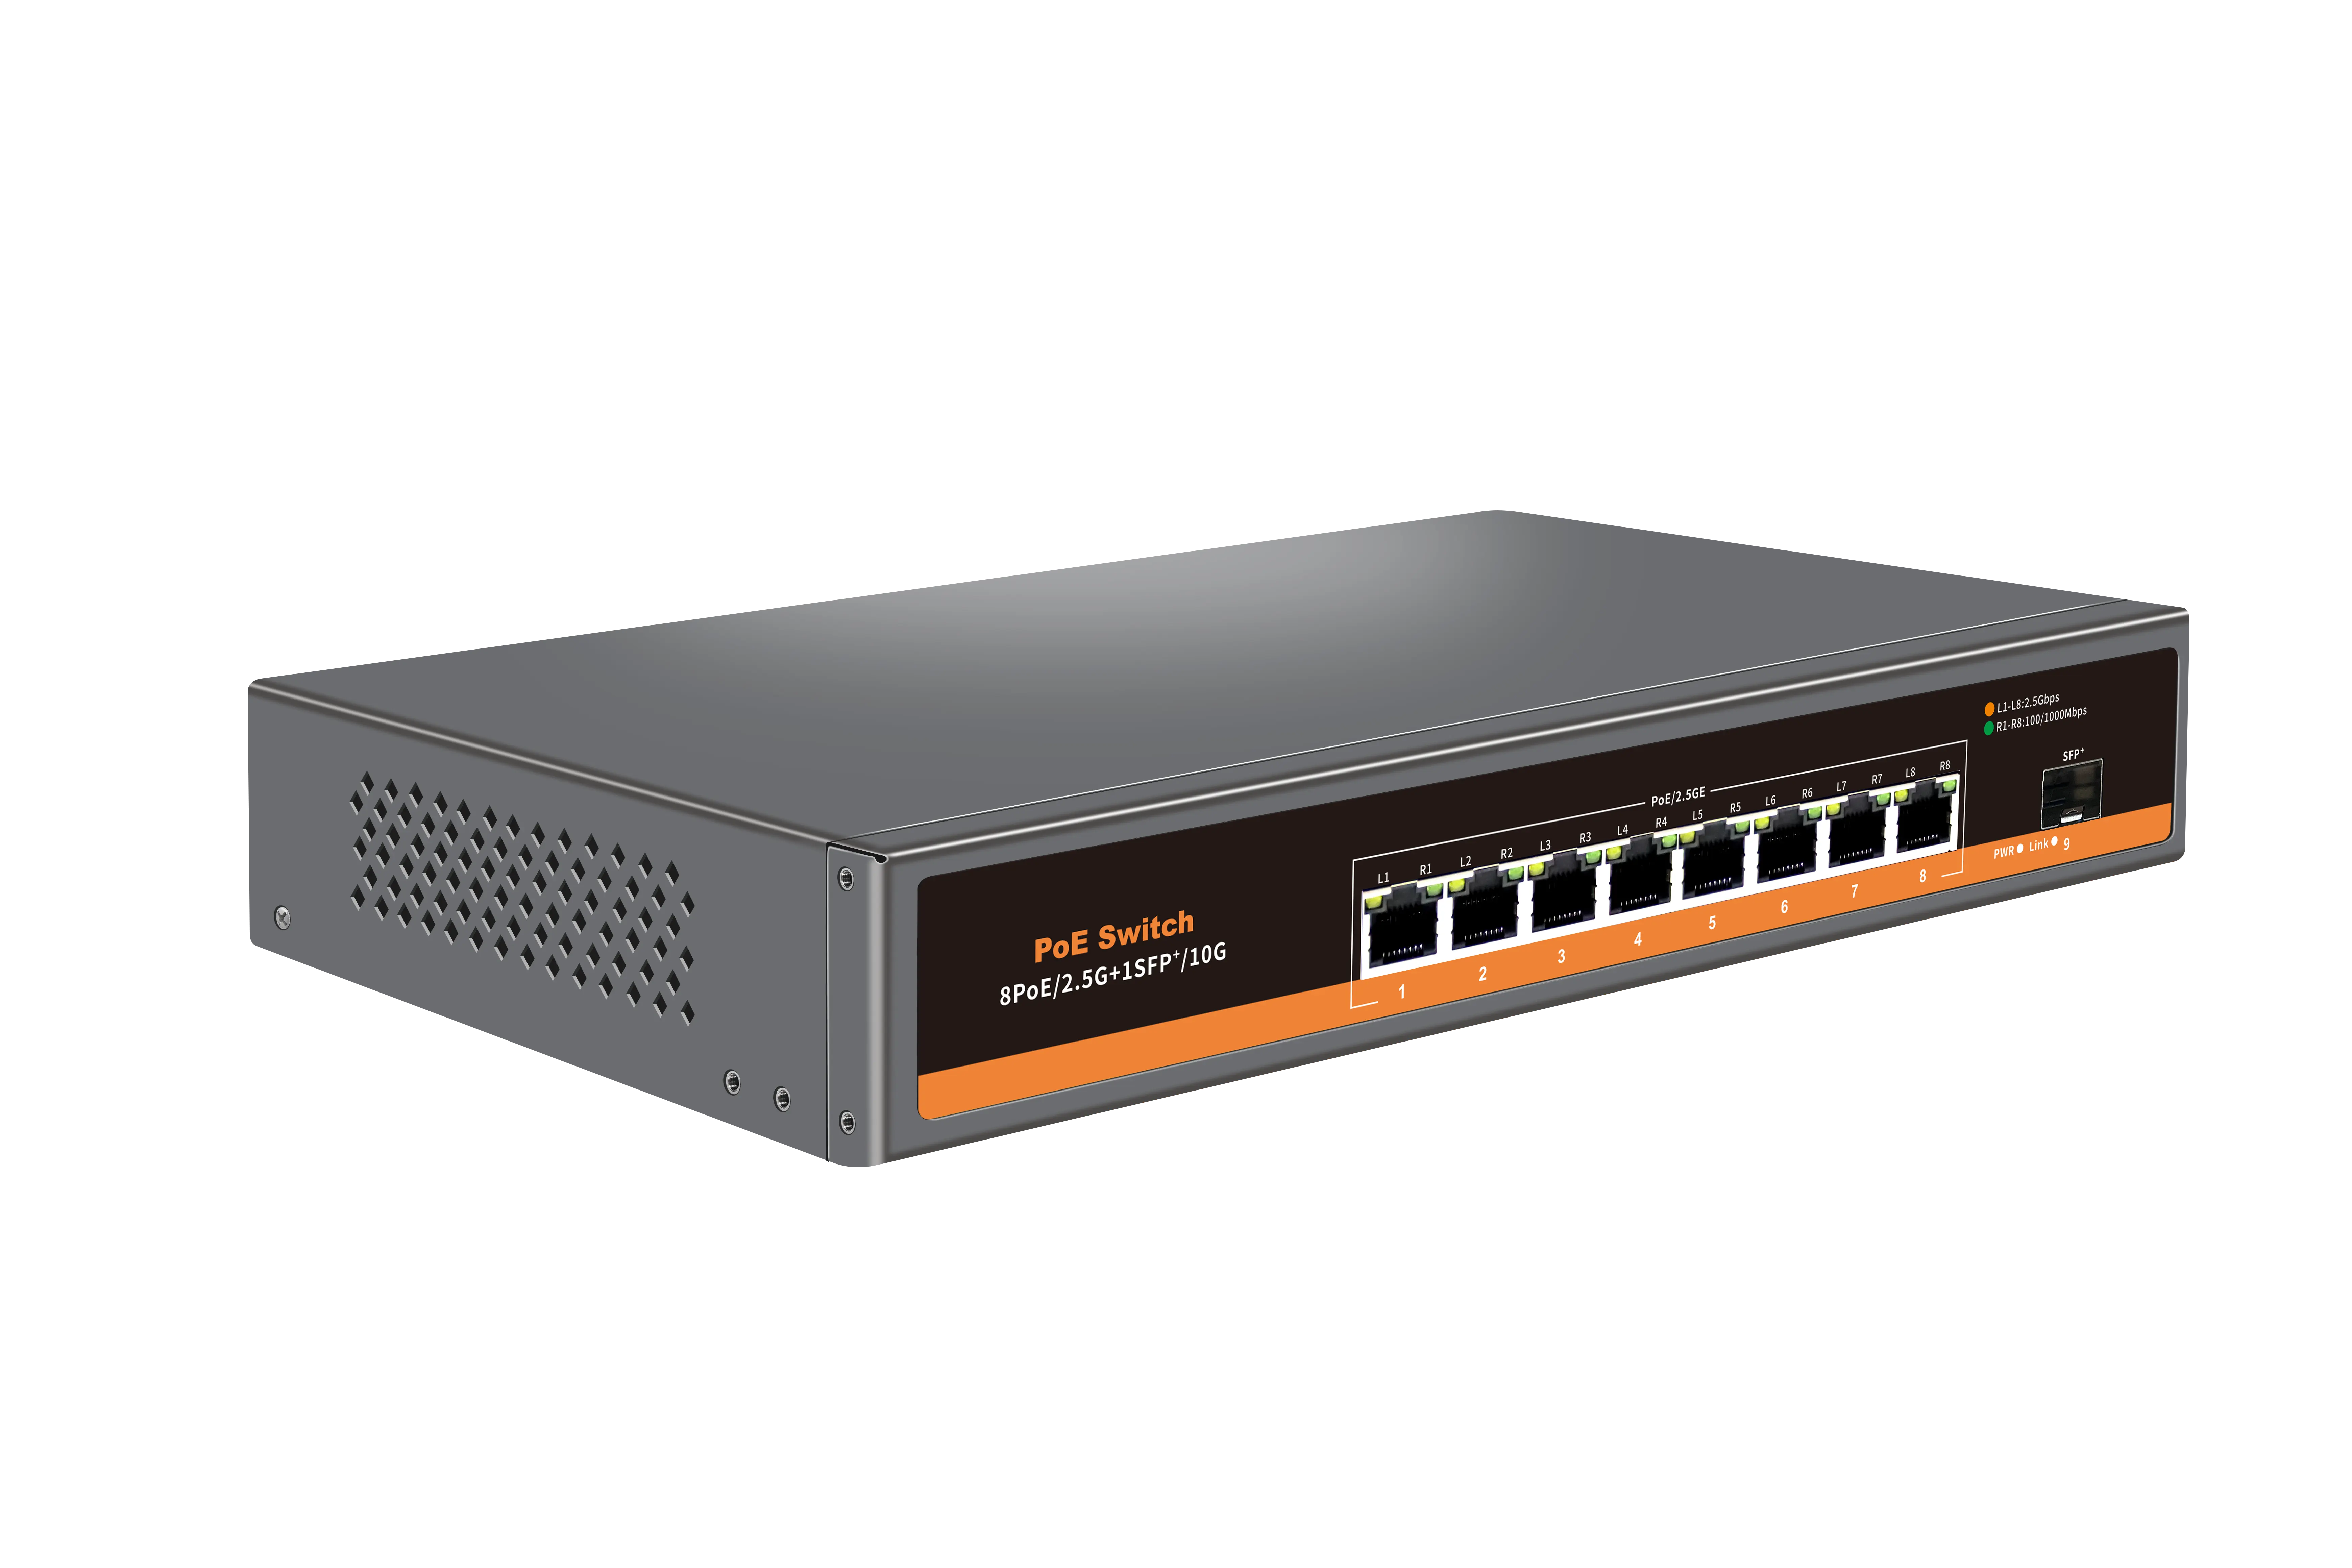 New Design 8 Port 2.5G PoE Switch 10G SFP+ Base-t Ports Network Switch for IP cameras/wireless access points/VoIP phones